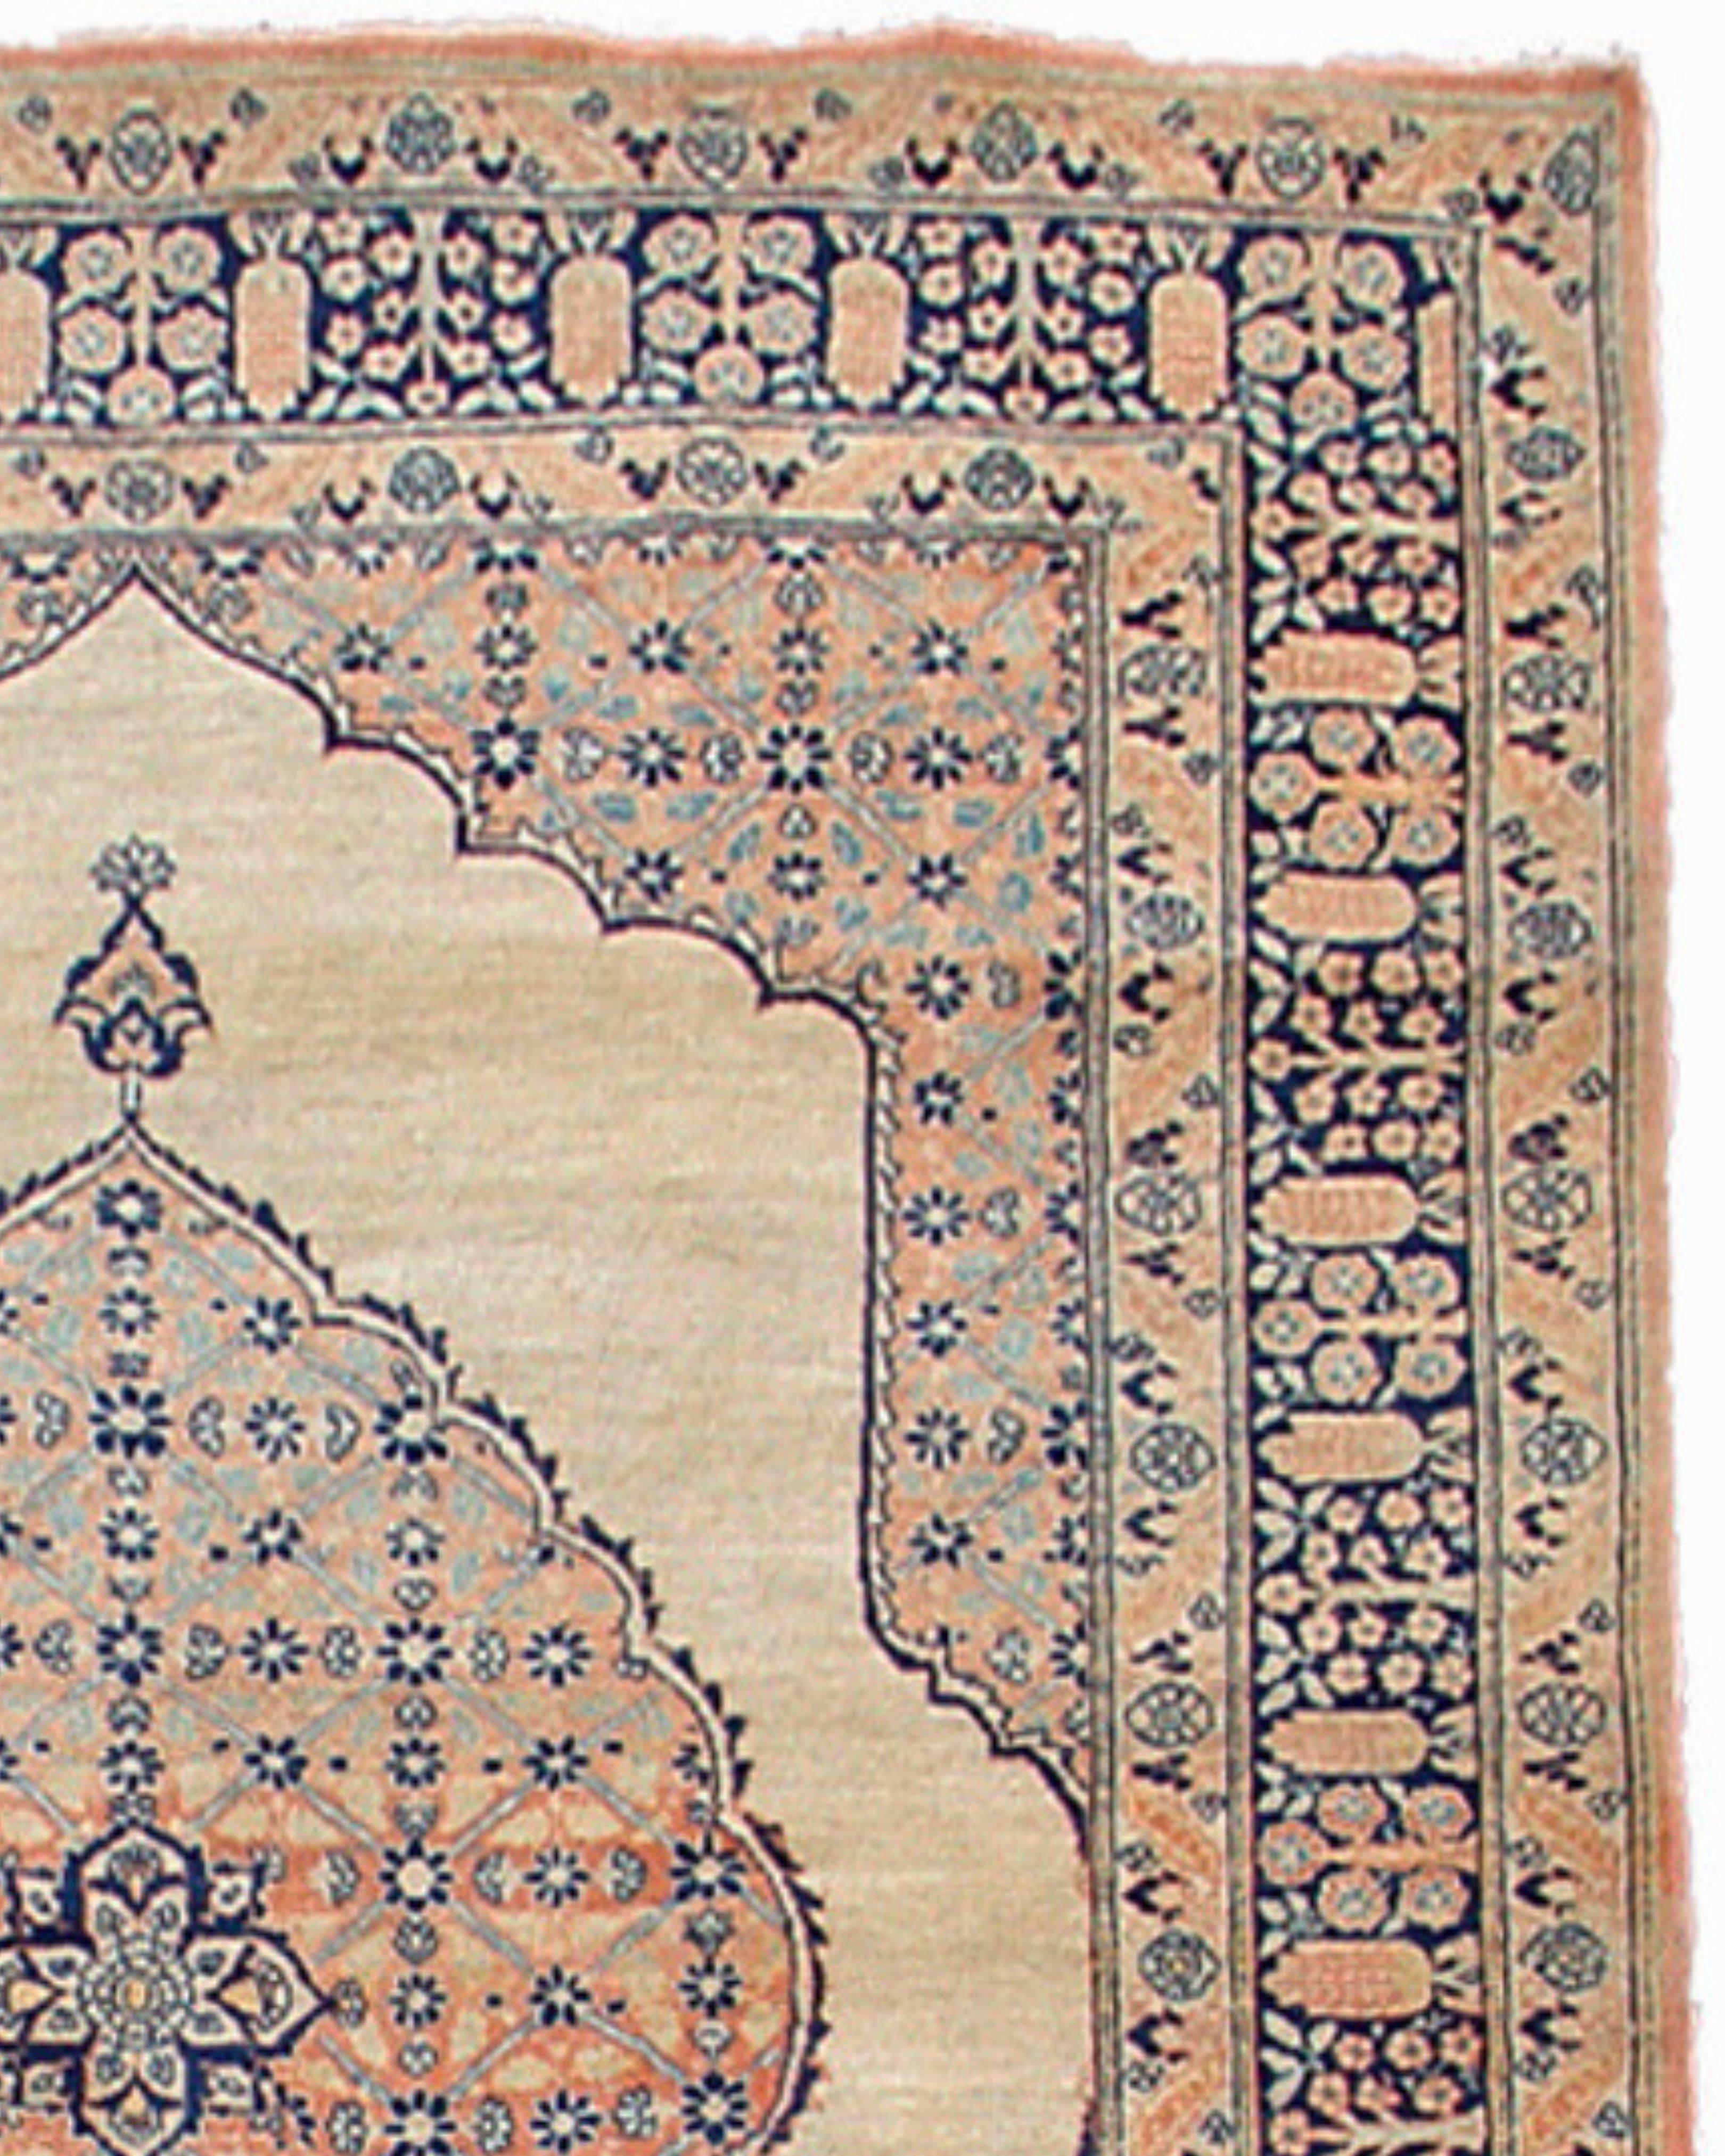 Antique Persian Tabriz Rug, 19th Century

This traditional antique Tabriz carpet from northwest Persia features a prominent elliptical medallion floating on an ivory field. Though dating from the later nineteenth century, the medallion and